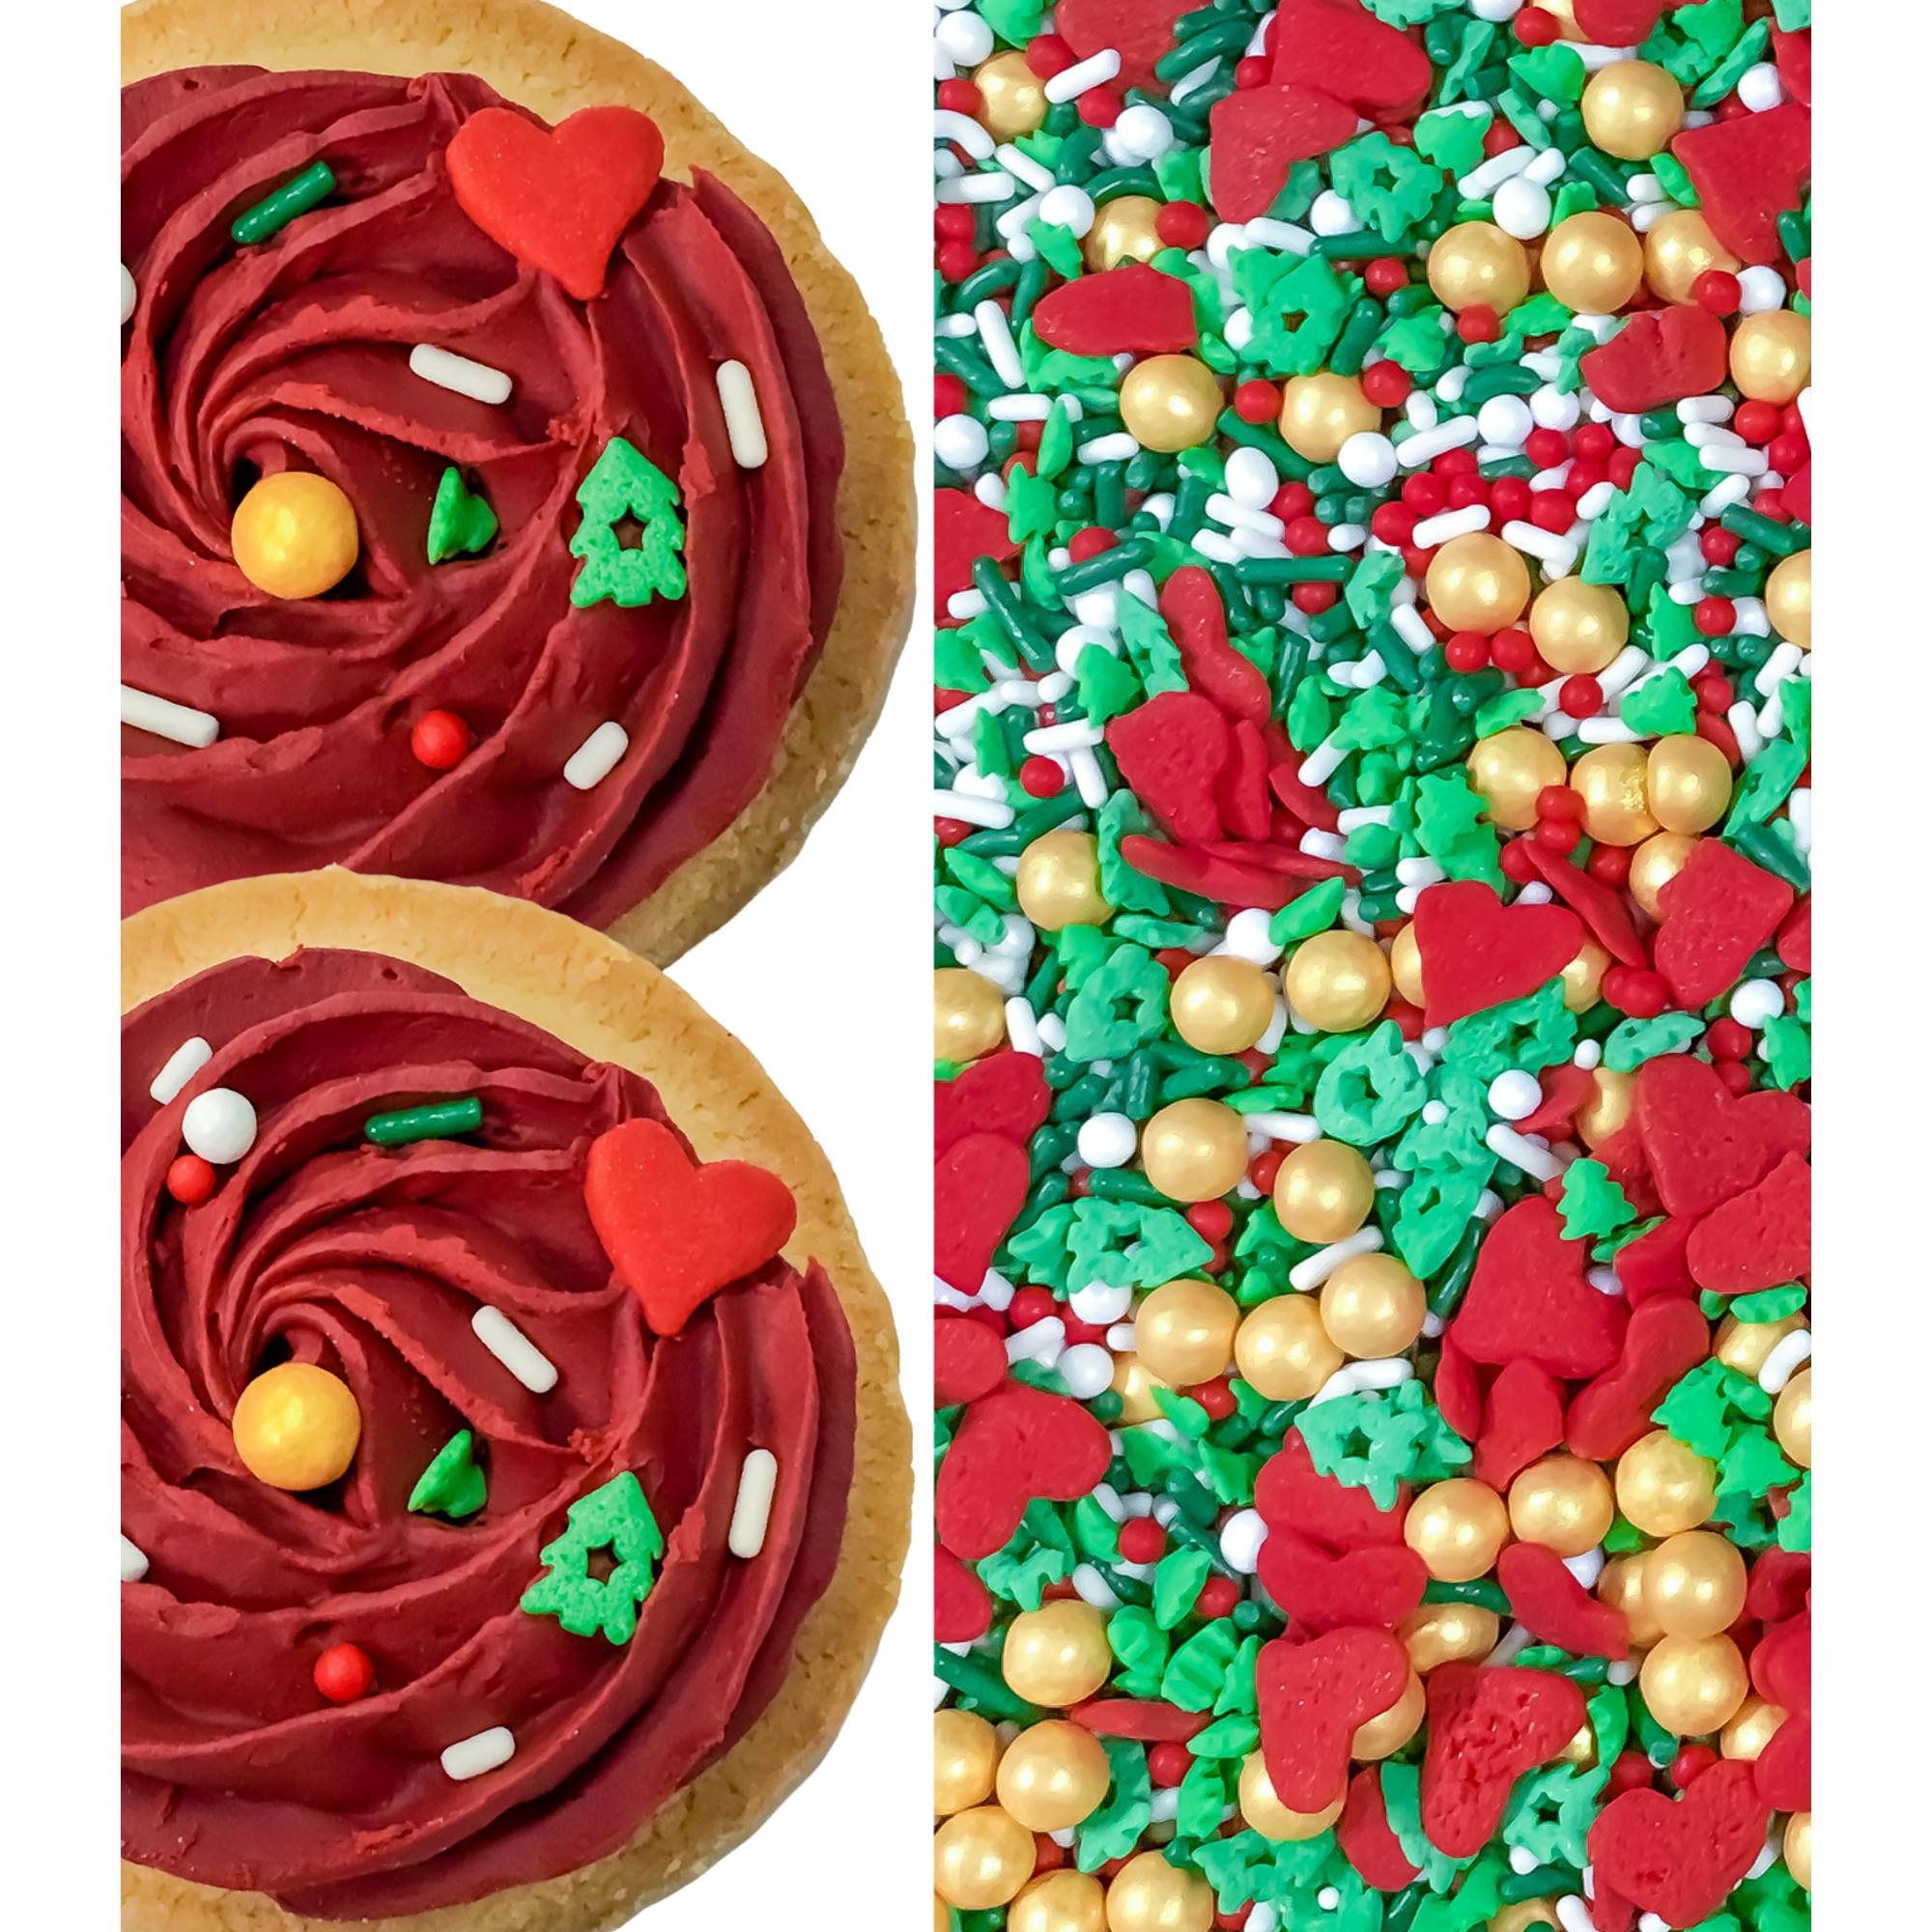 Product shots of Christmas sprinkles: on the left, adorning cookies; on the right, by themselves